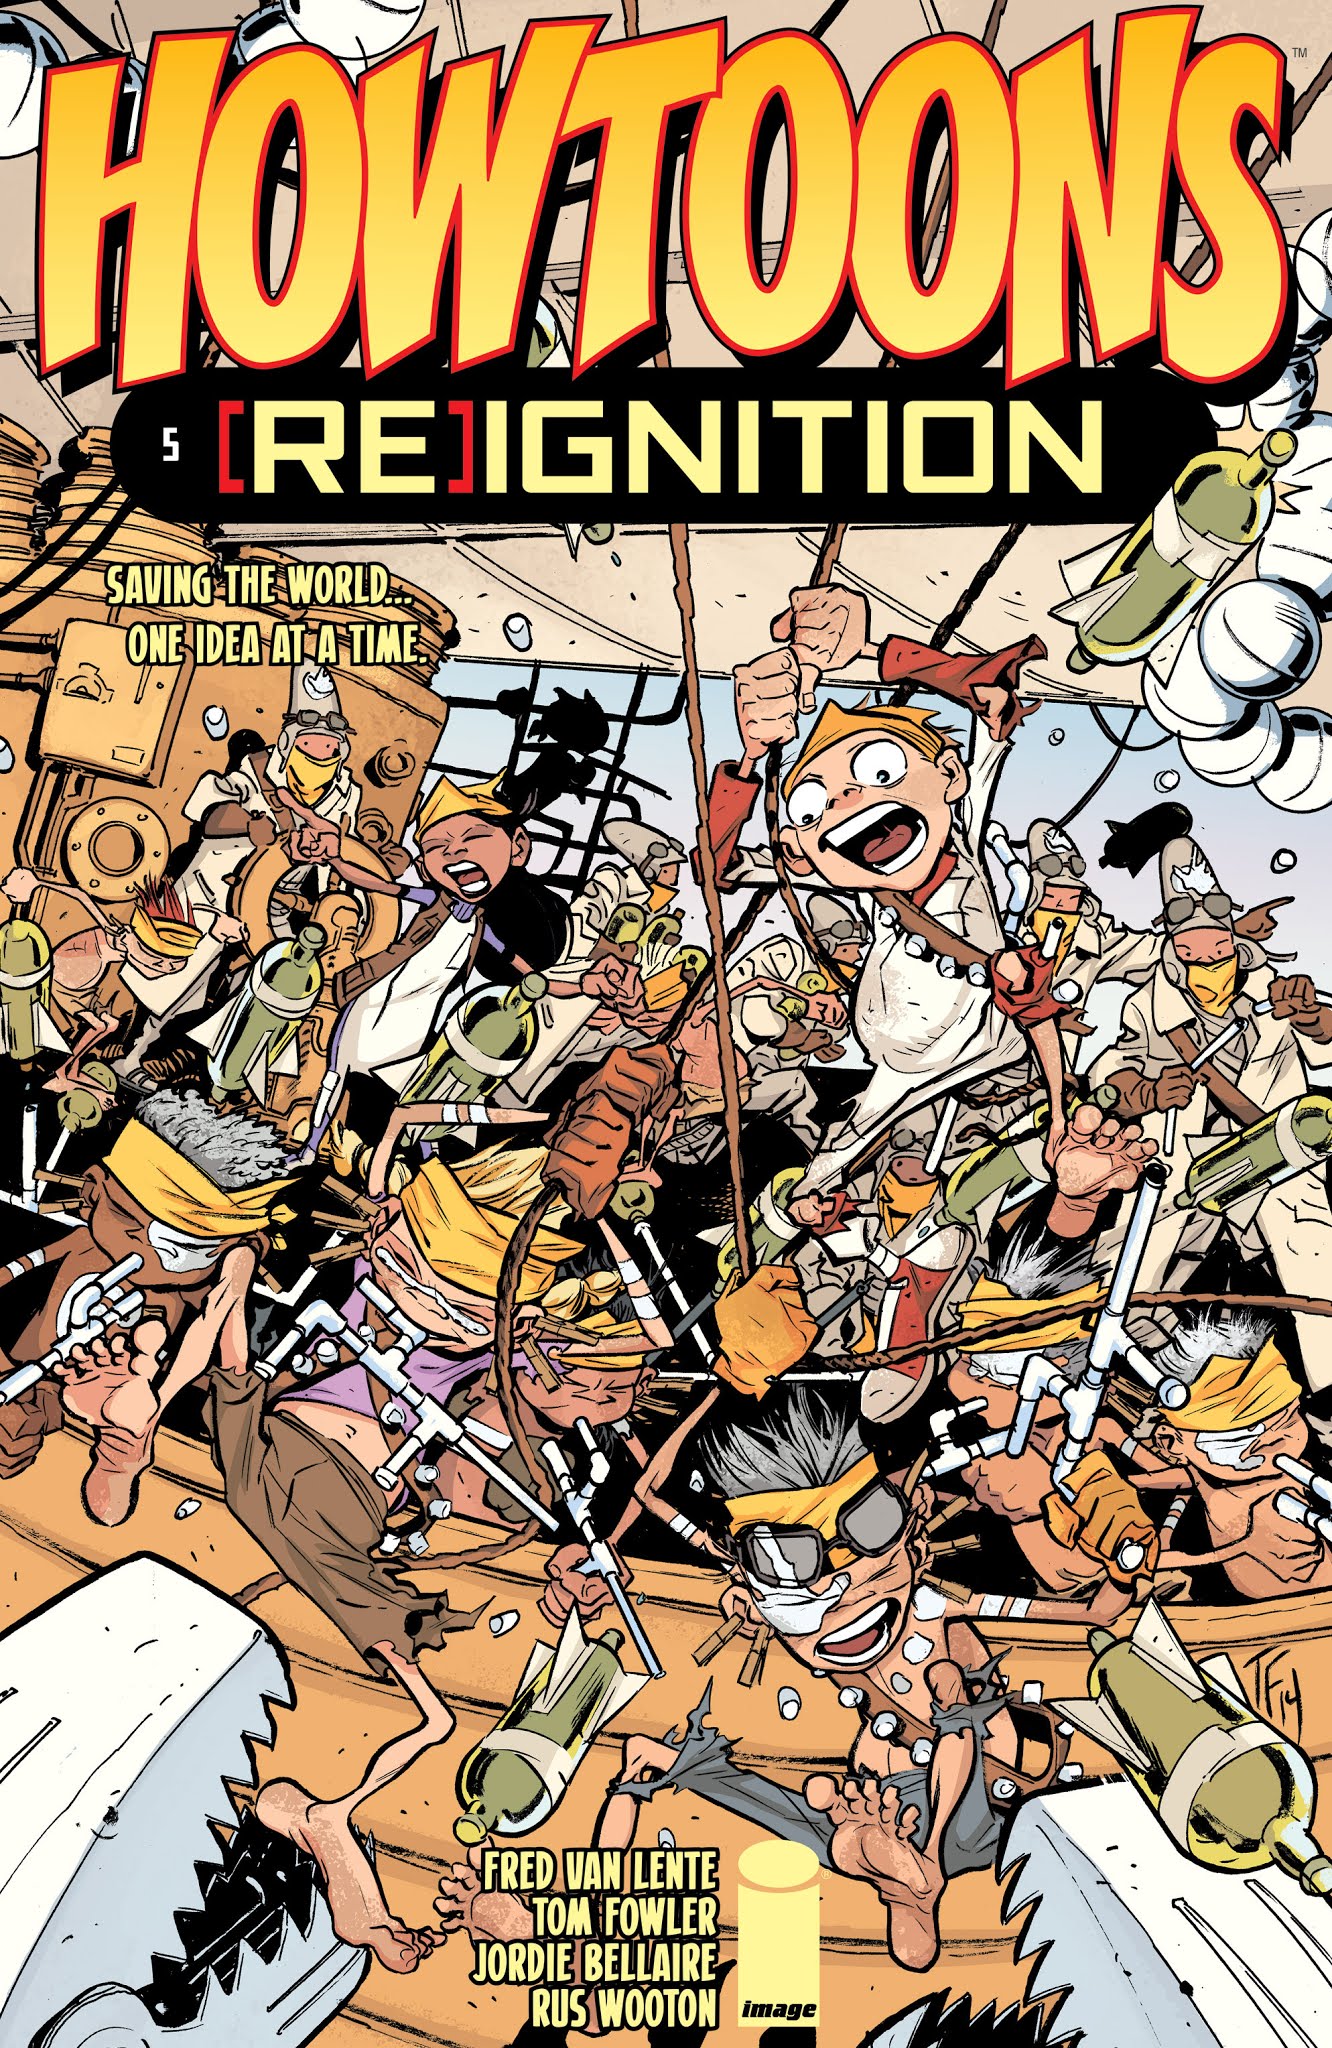 Read online Howtoons [Re]Ignition comic -  Issue #5 - 1